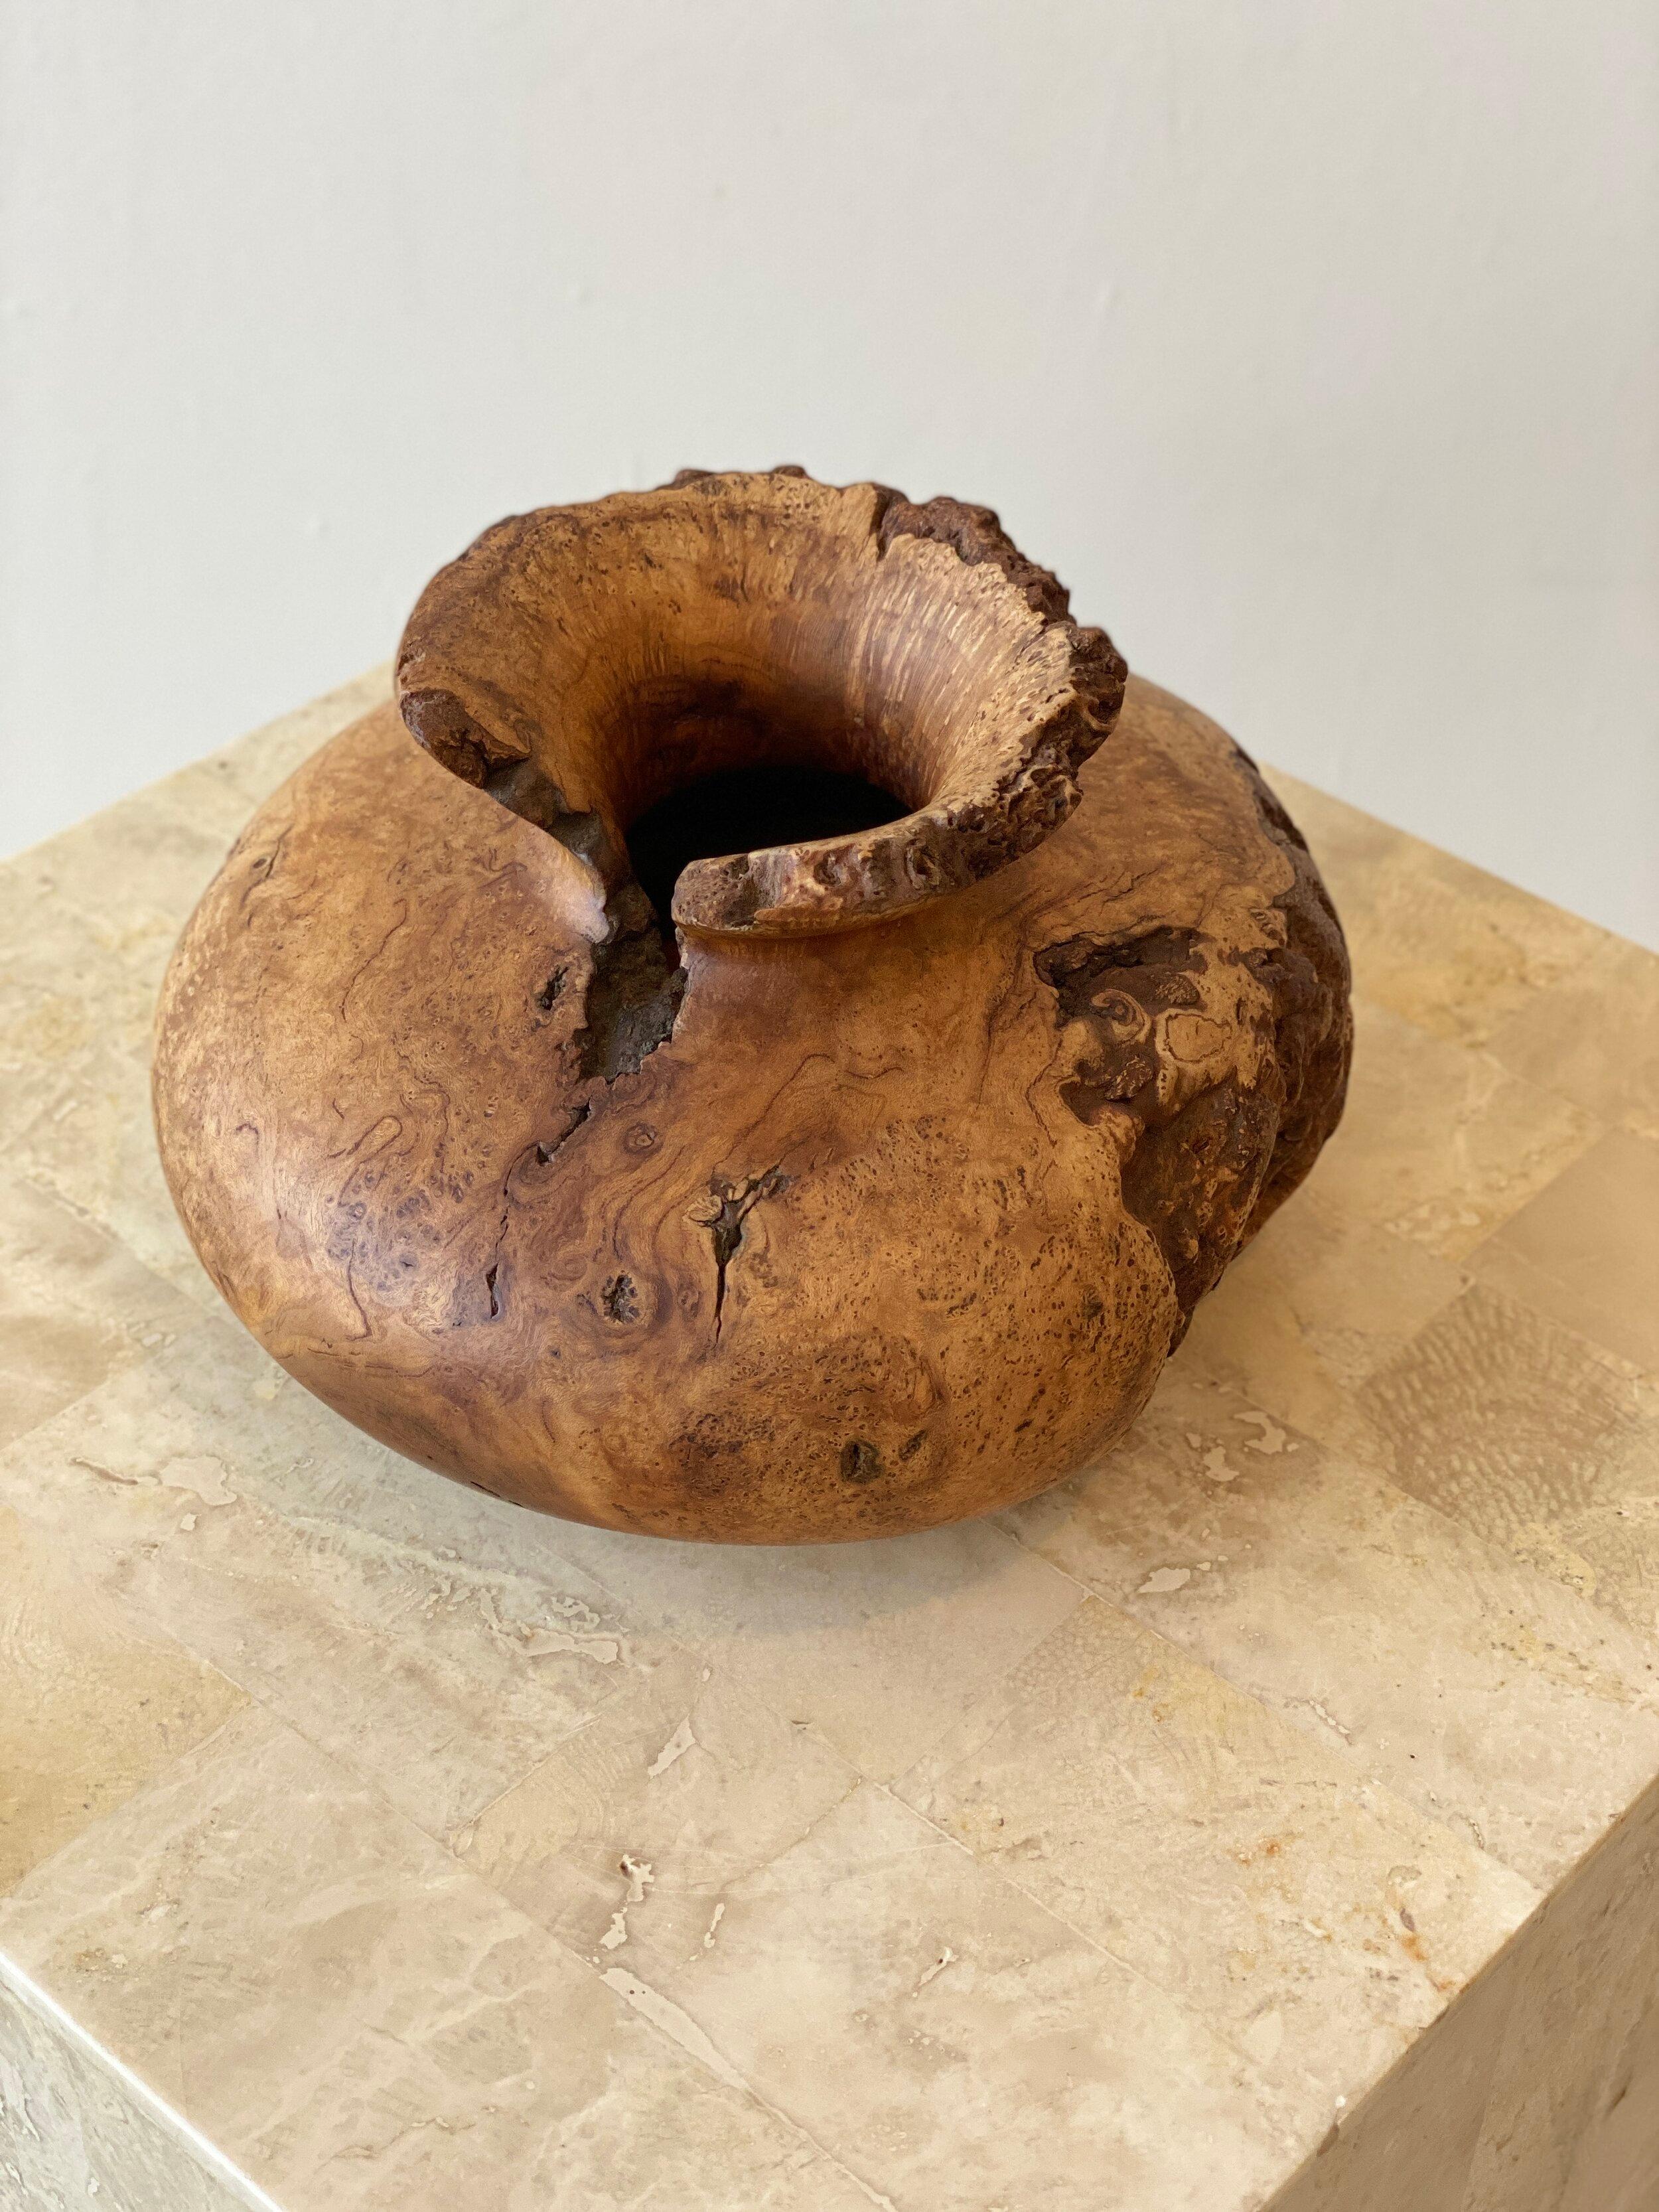 North American Melvin Lindquist Sculptural Turned Cherry Burl Wood Vase, Signed and Dated 1978 For Sale